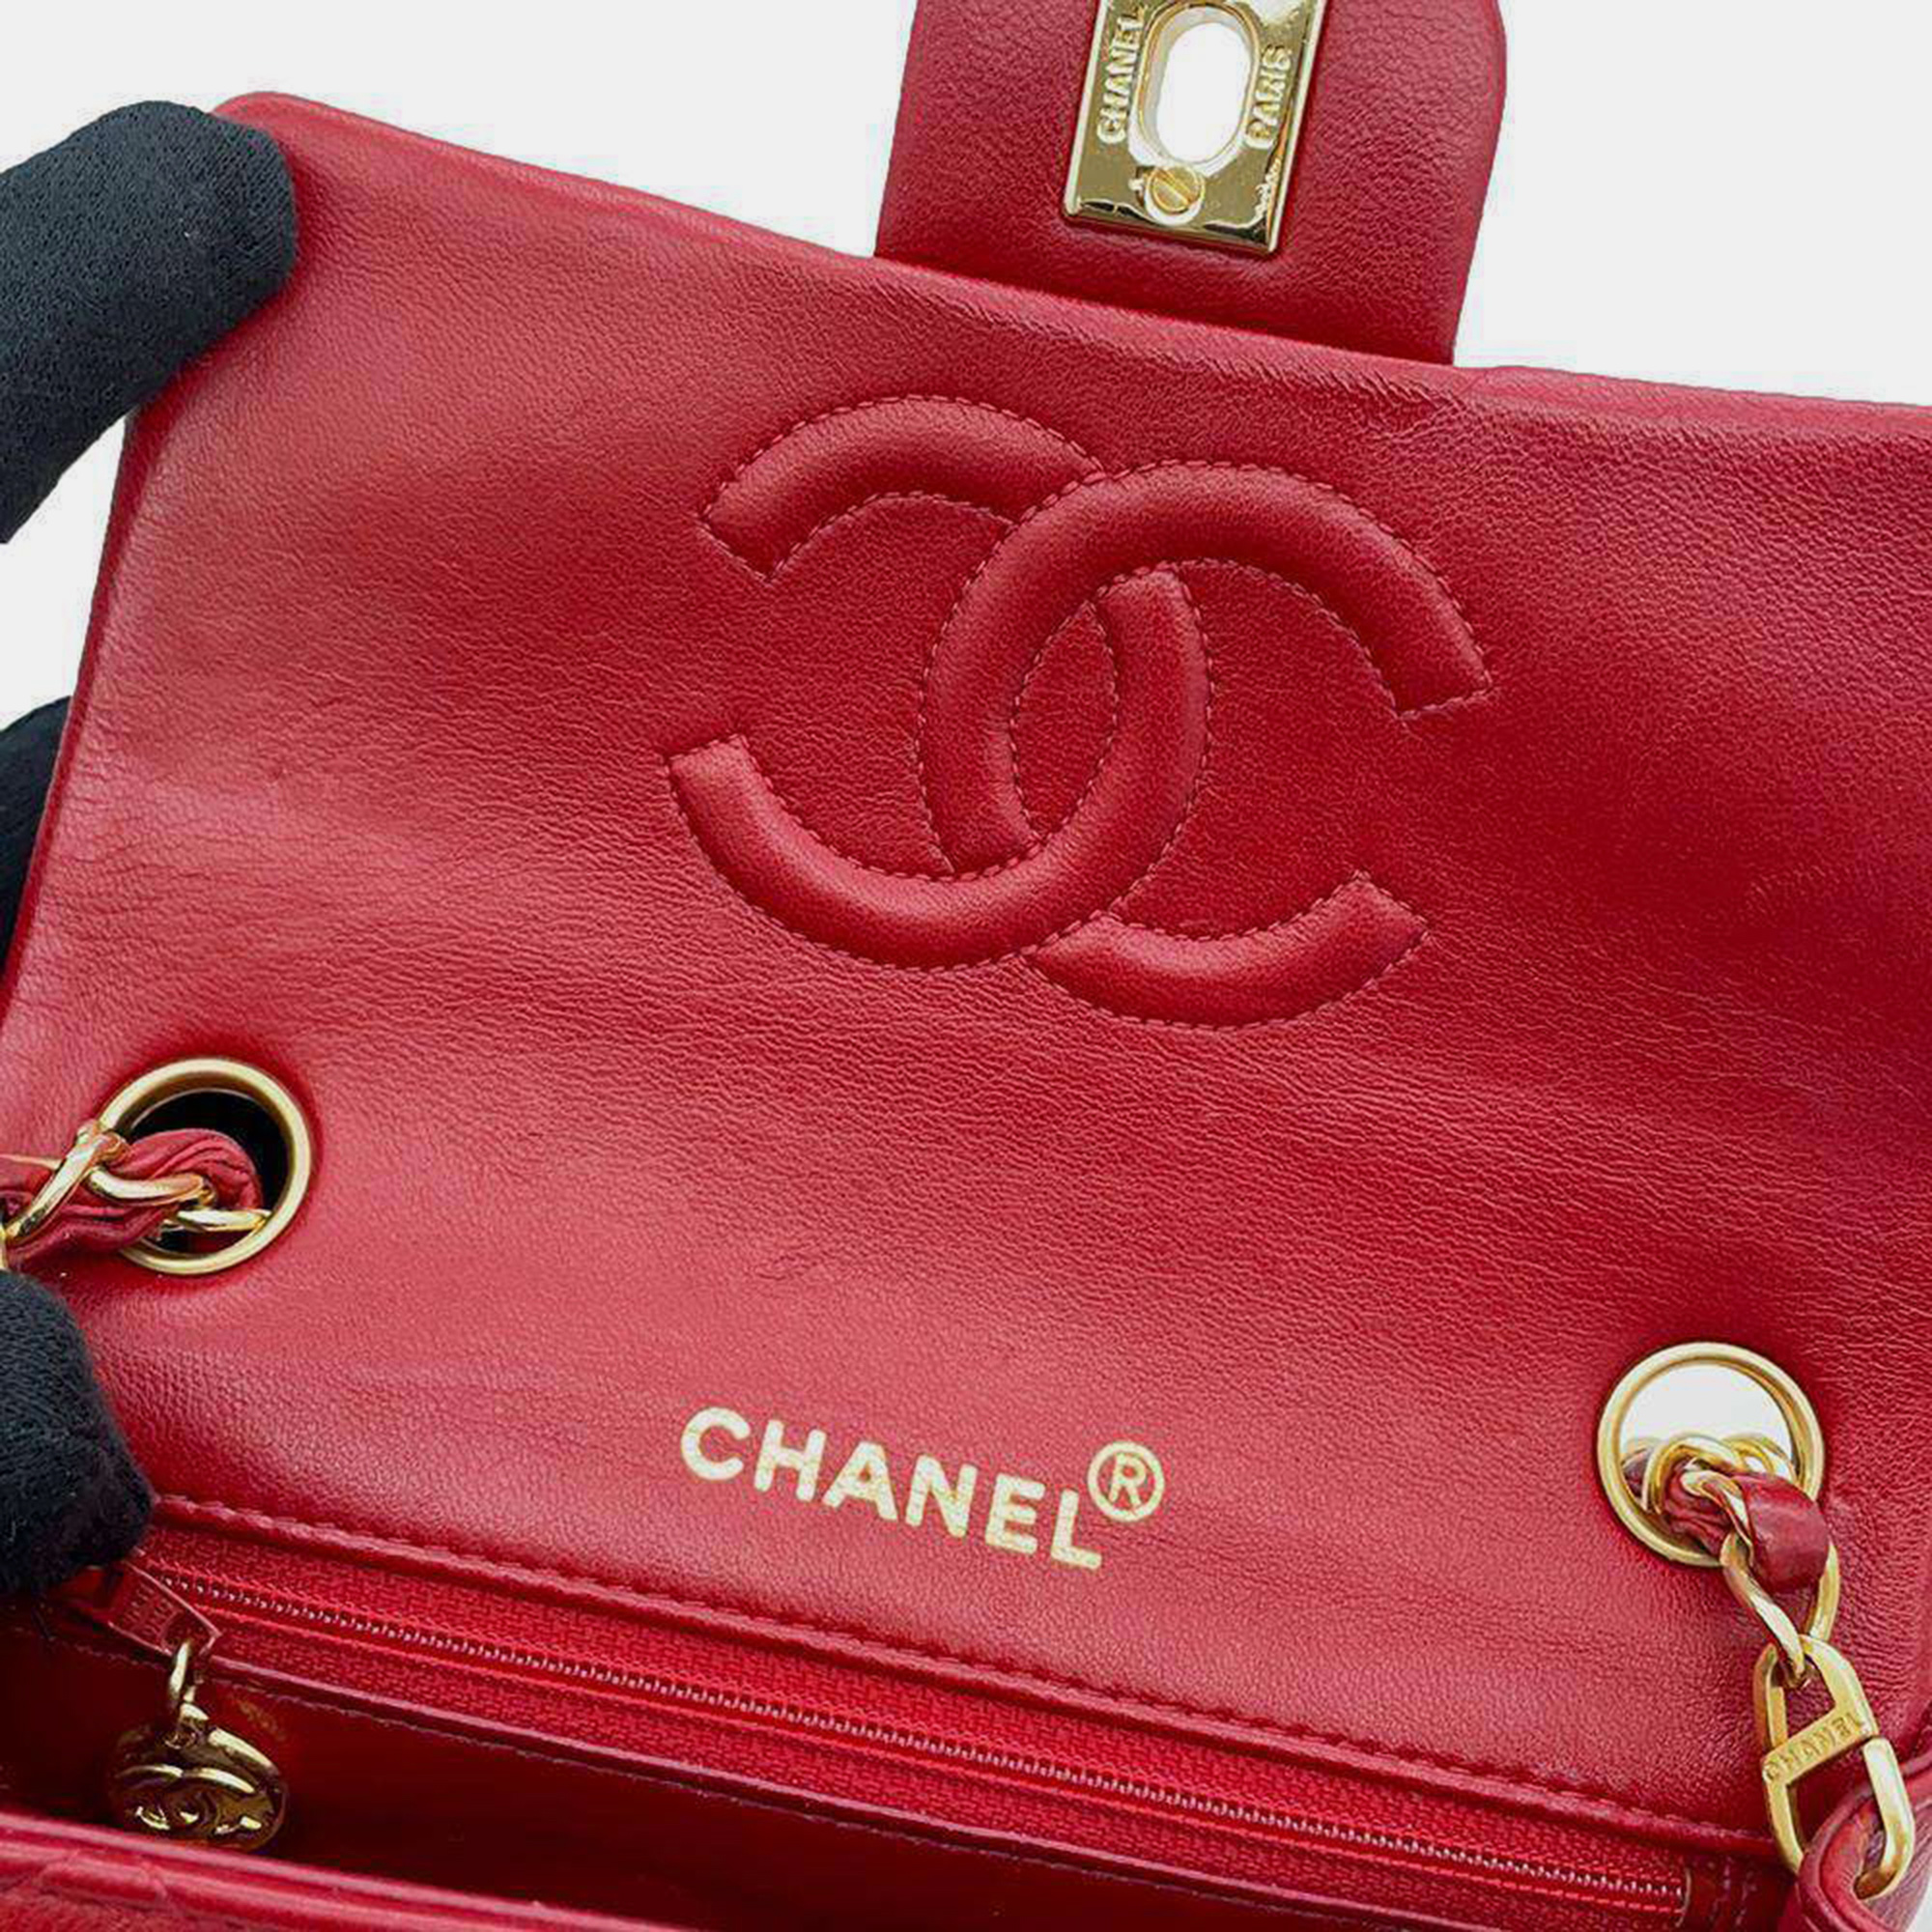 Chanel Red Leather Mini CC Flap Bag